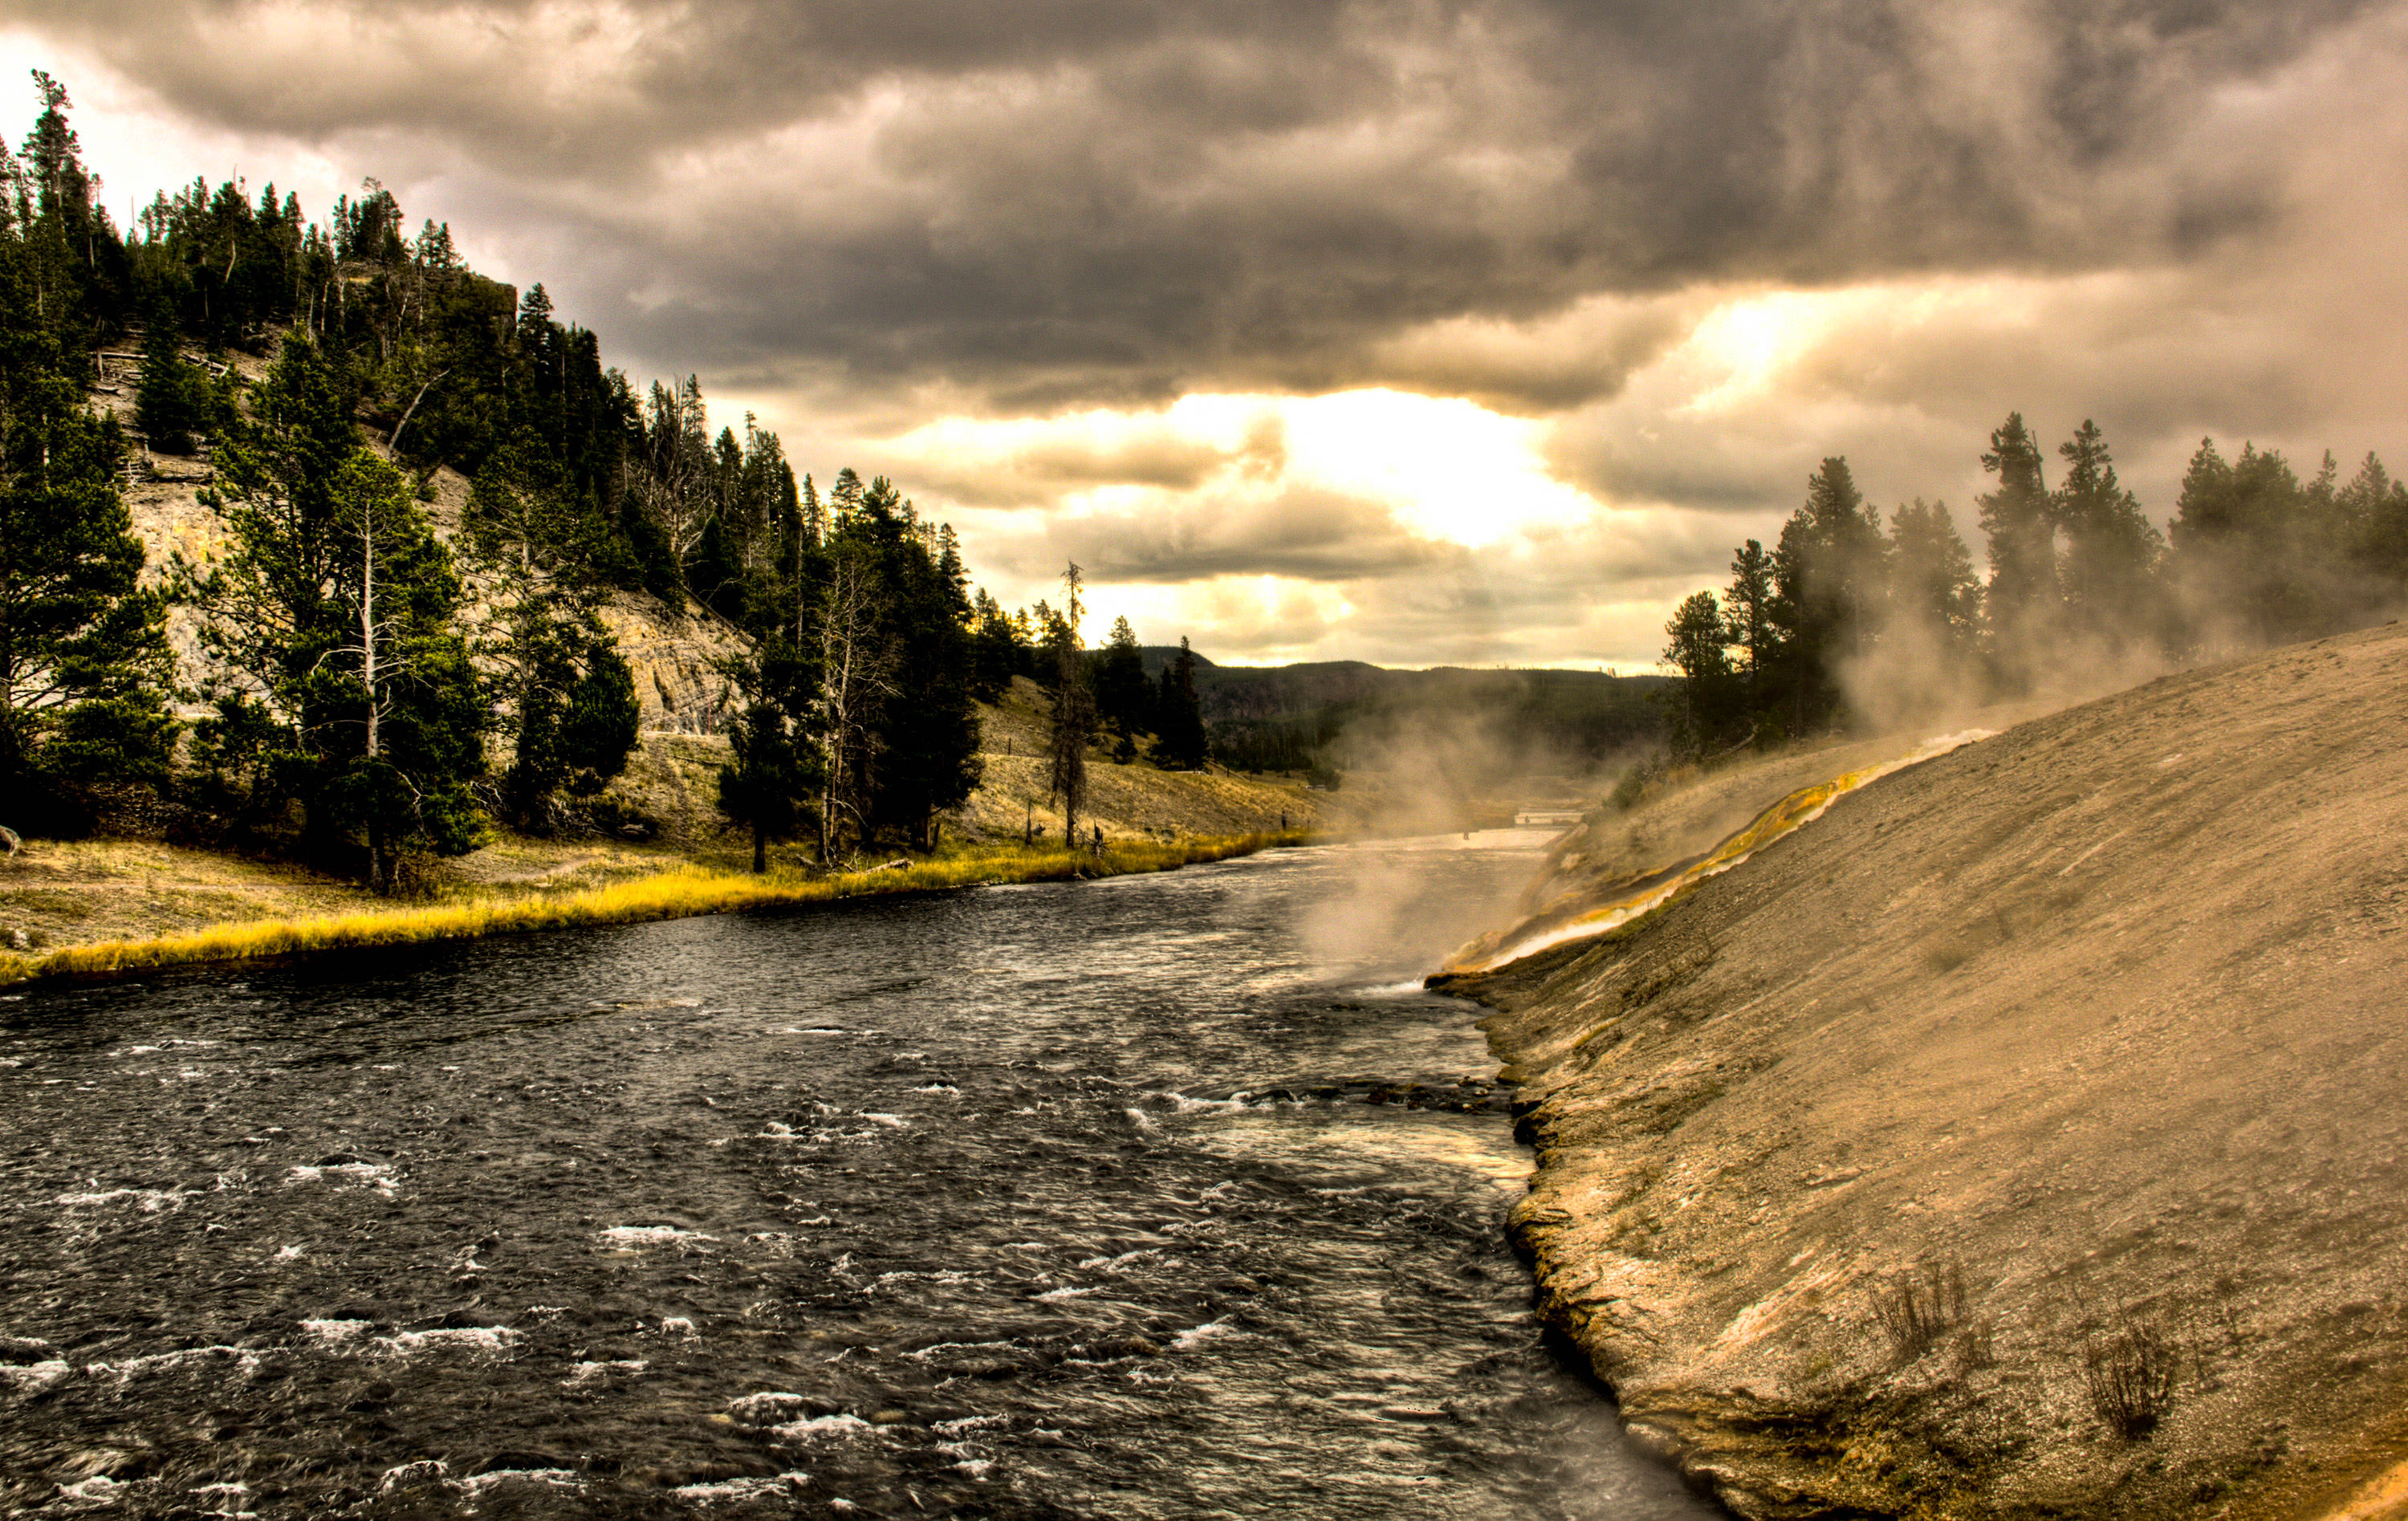 Overcast river's edge in Yellowstone National Park.